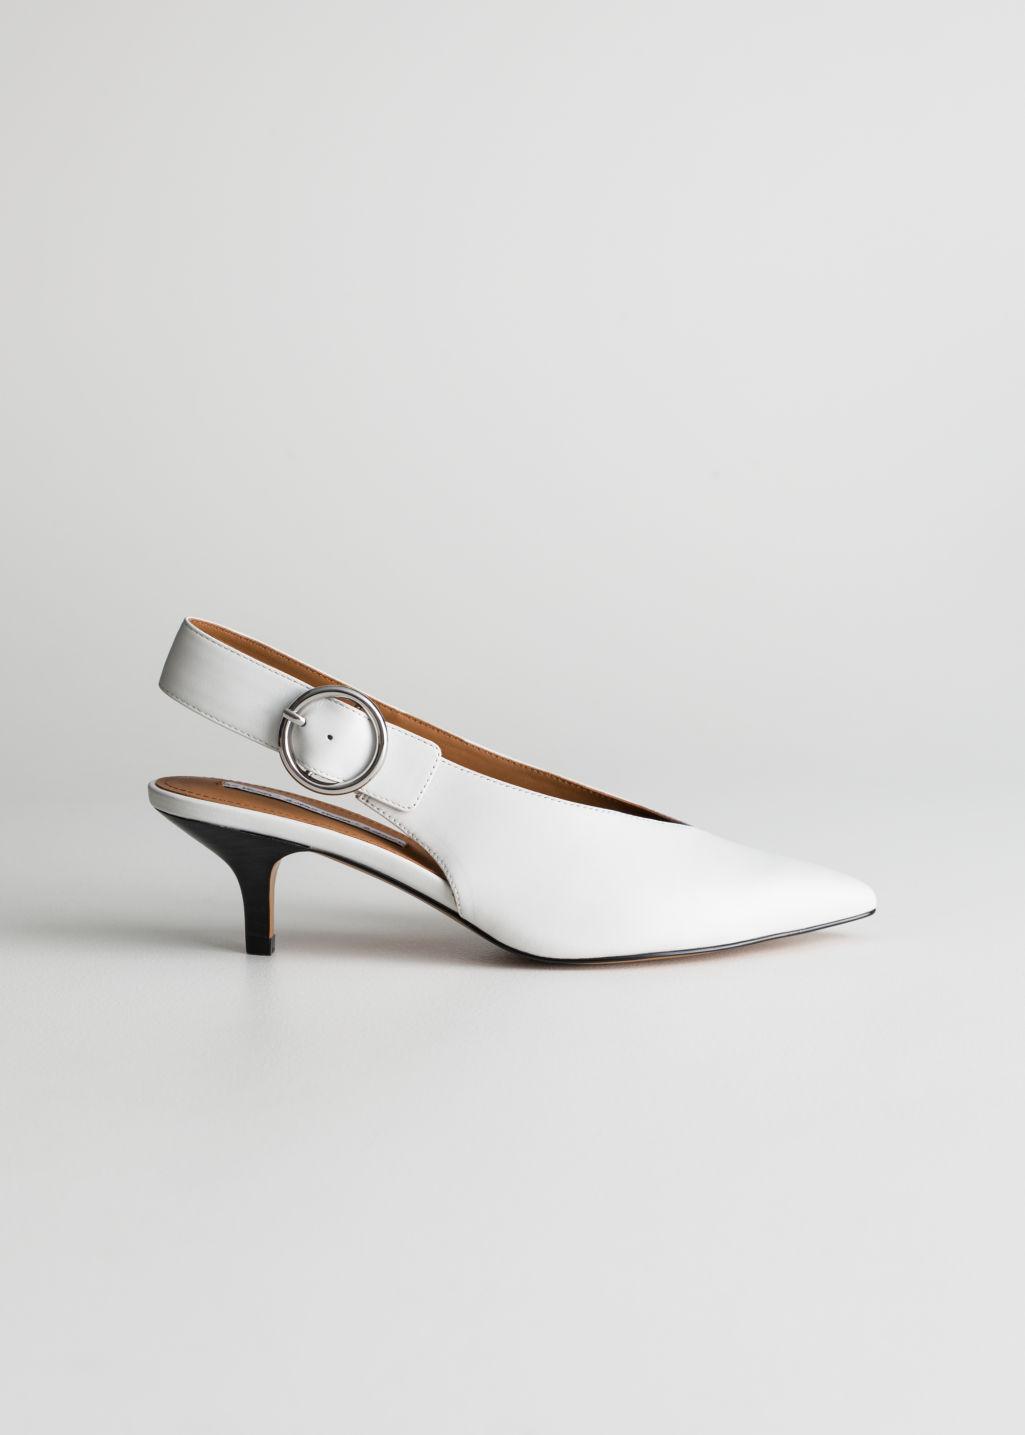 & Other Stories Pointed Slingback Kitten Heels in White | Lyst